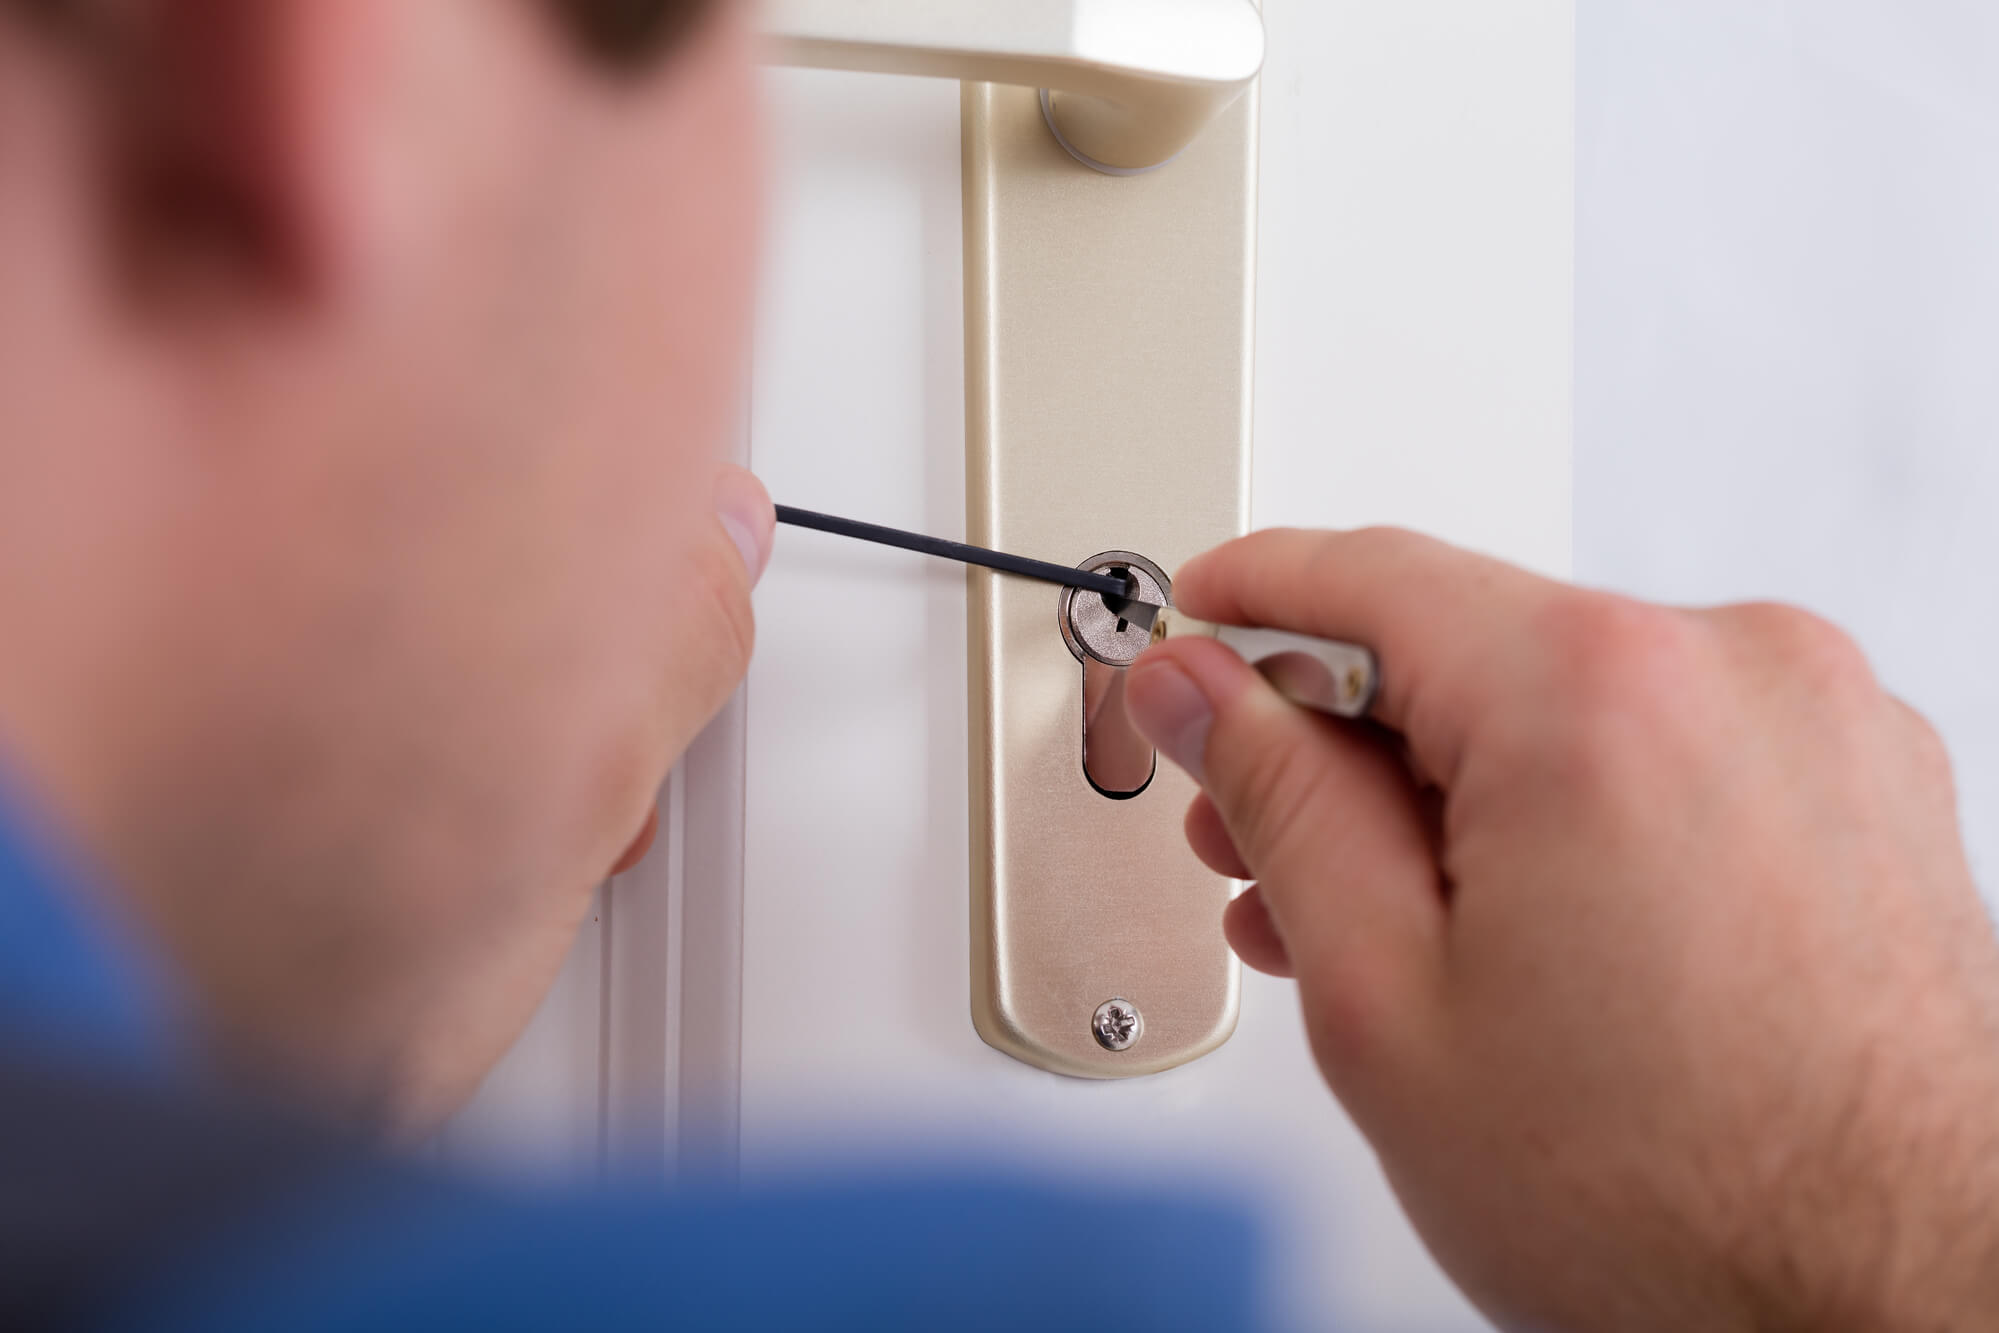 Installing a Master Key System at Home